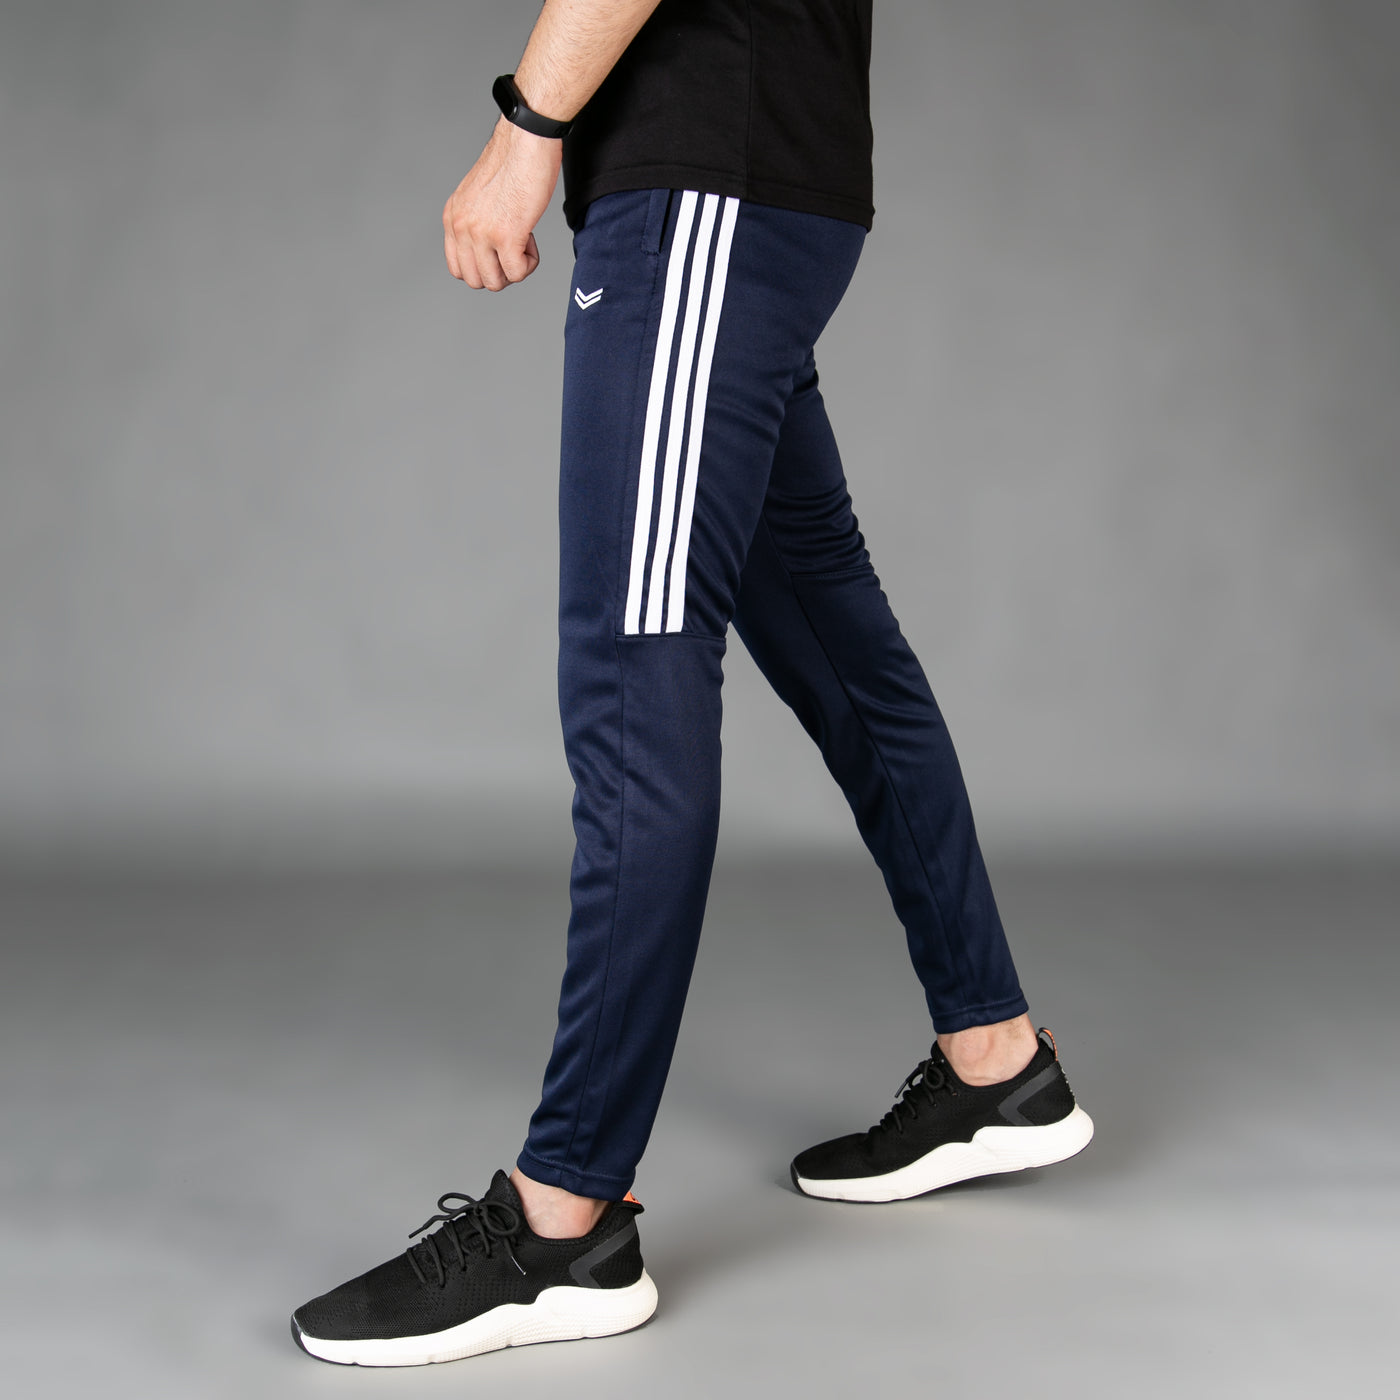 Navy Quick Dry Bottoms with Short Three Stripes